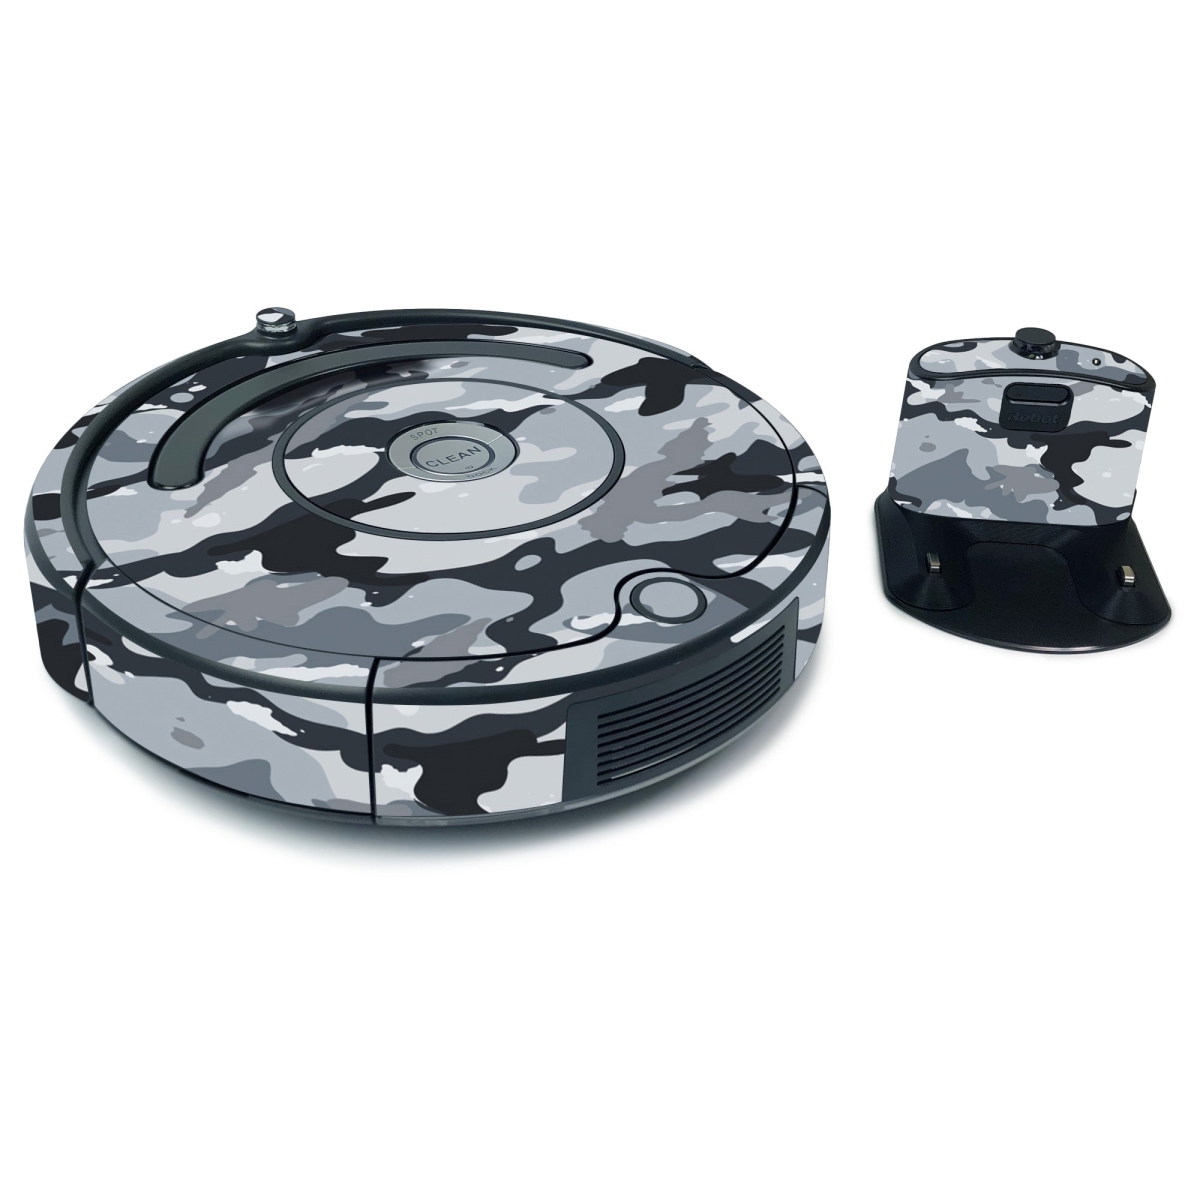 Picture of MightySkins IRRO675-Gray Camouflage Skin for iRobot Roomba 675 Max Coverage - Gray Camouflage